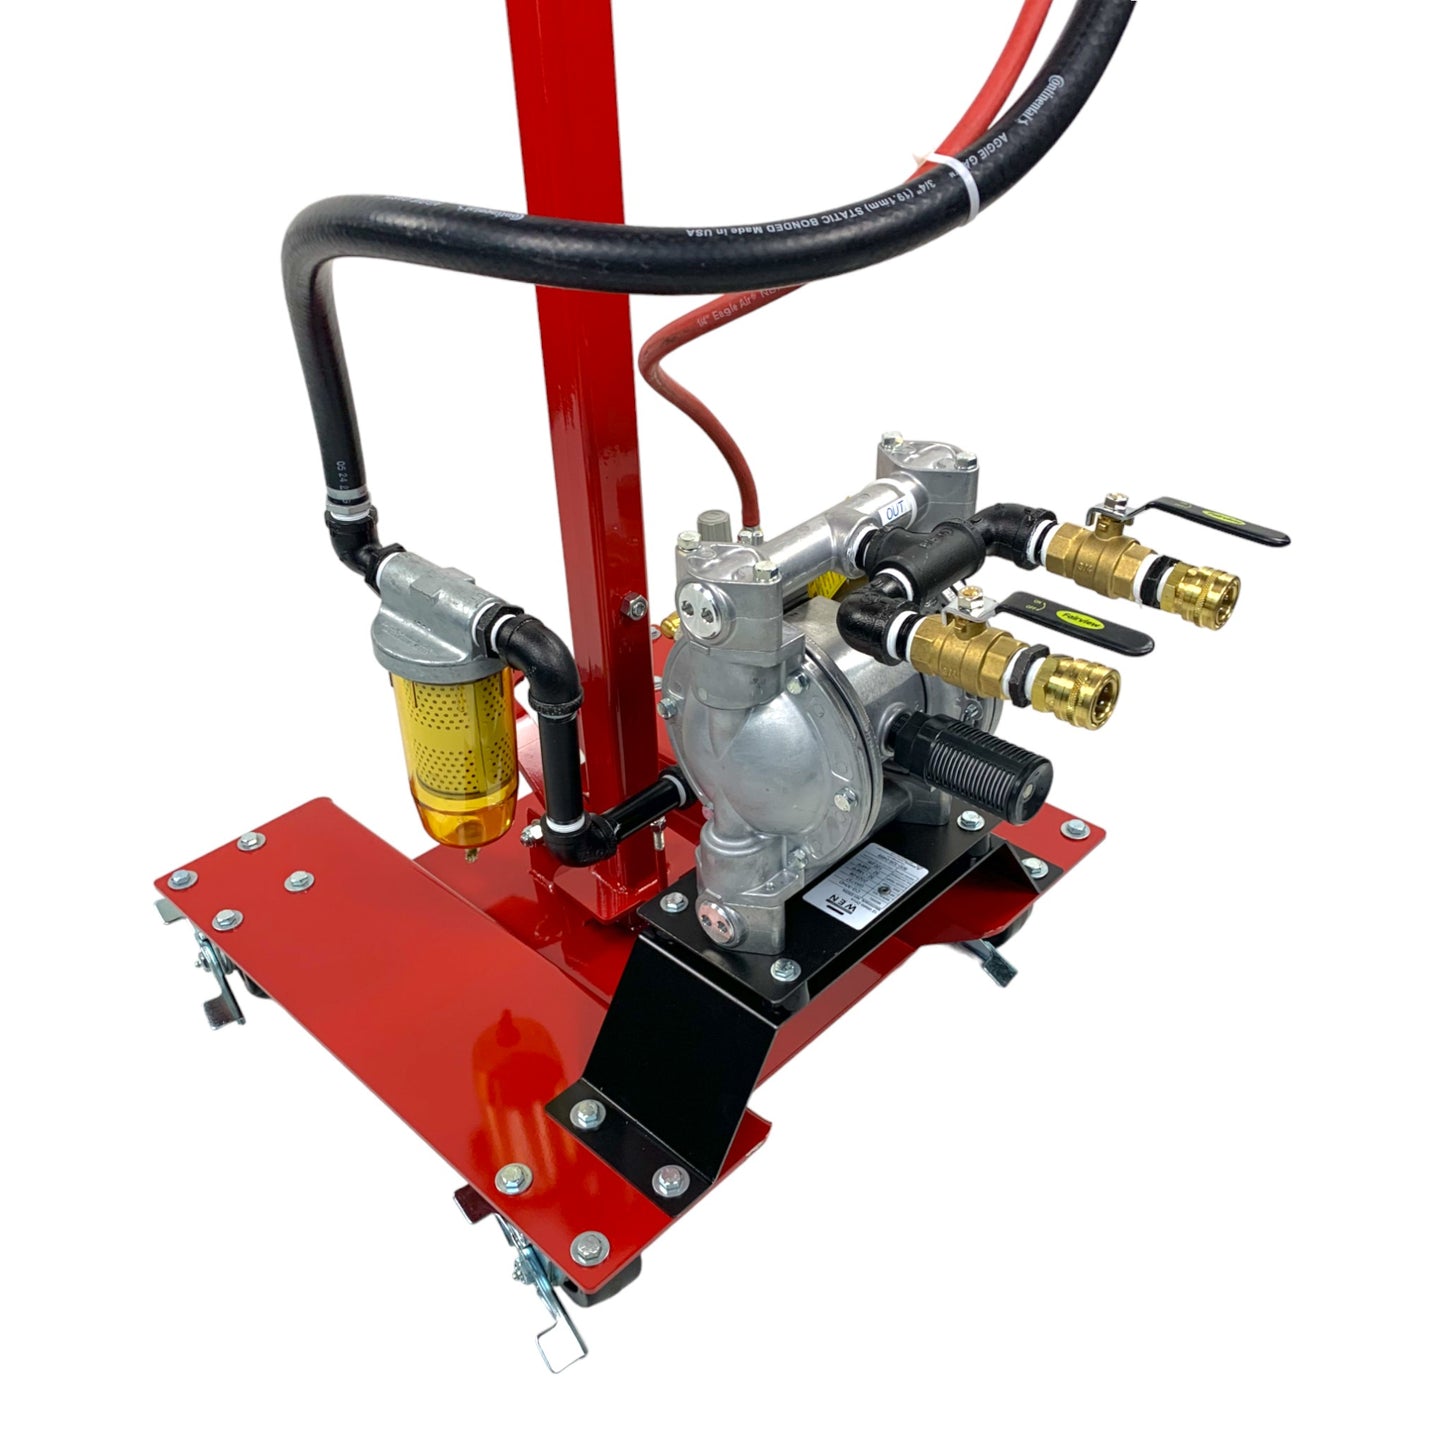 TD850 Fuel Tank Drill System with Sight Glass, Heavy Duty Diaphragm Air Pump, Complete Filter Assembly & Bad Gas Diverter Valve